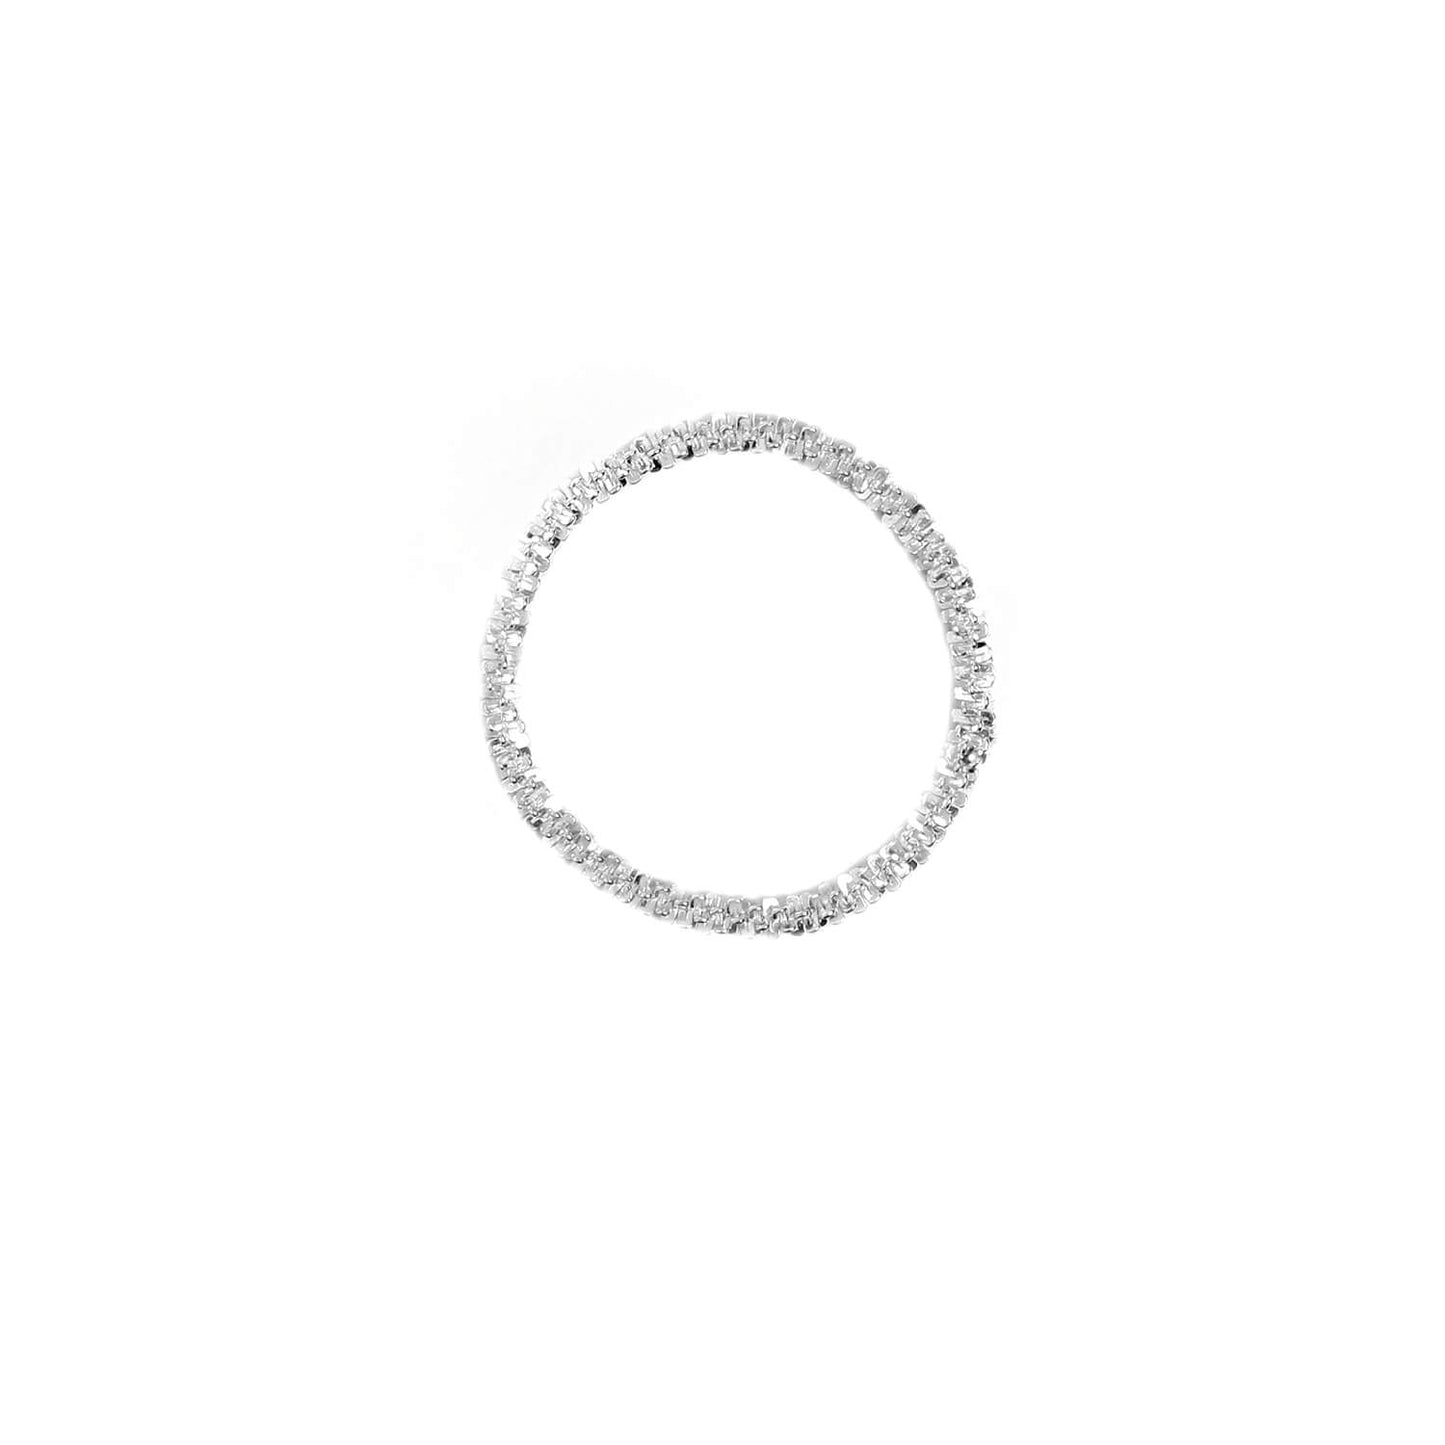 Minimalist Chic Sterling Silver Chain Ring  Buy at KHANIE